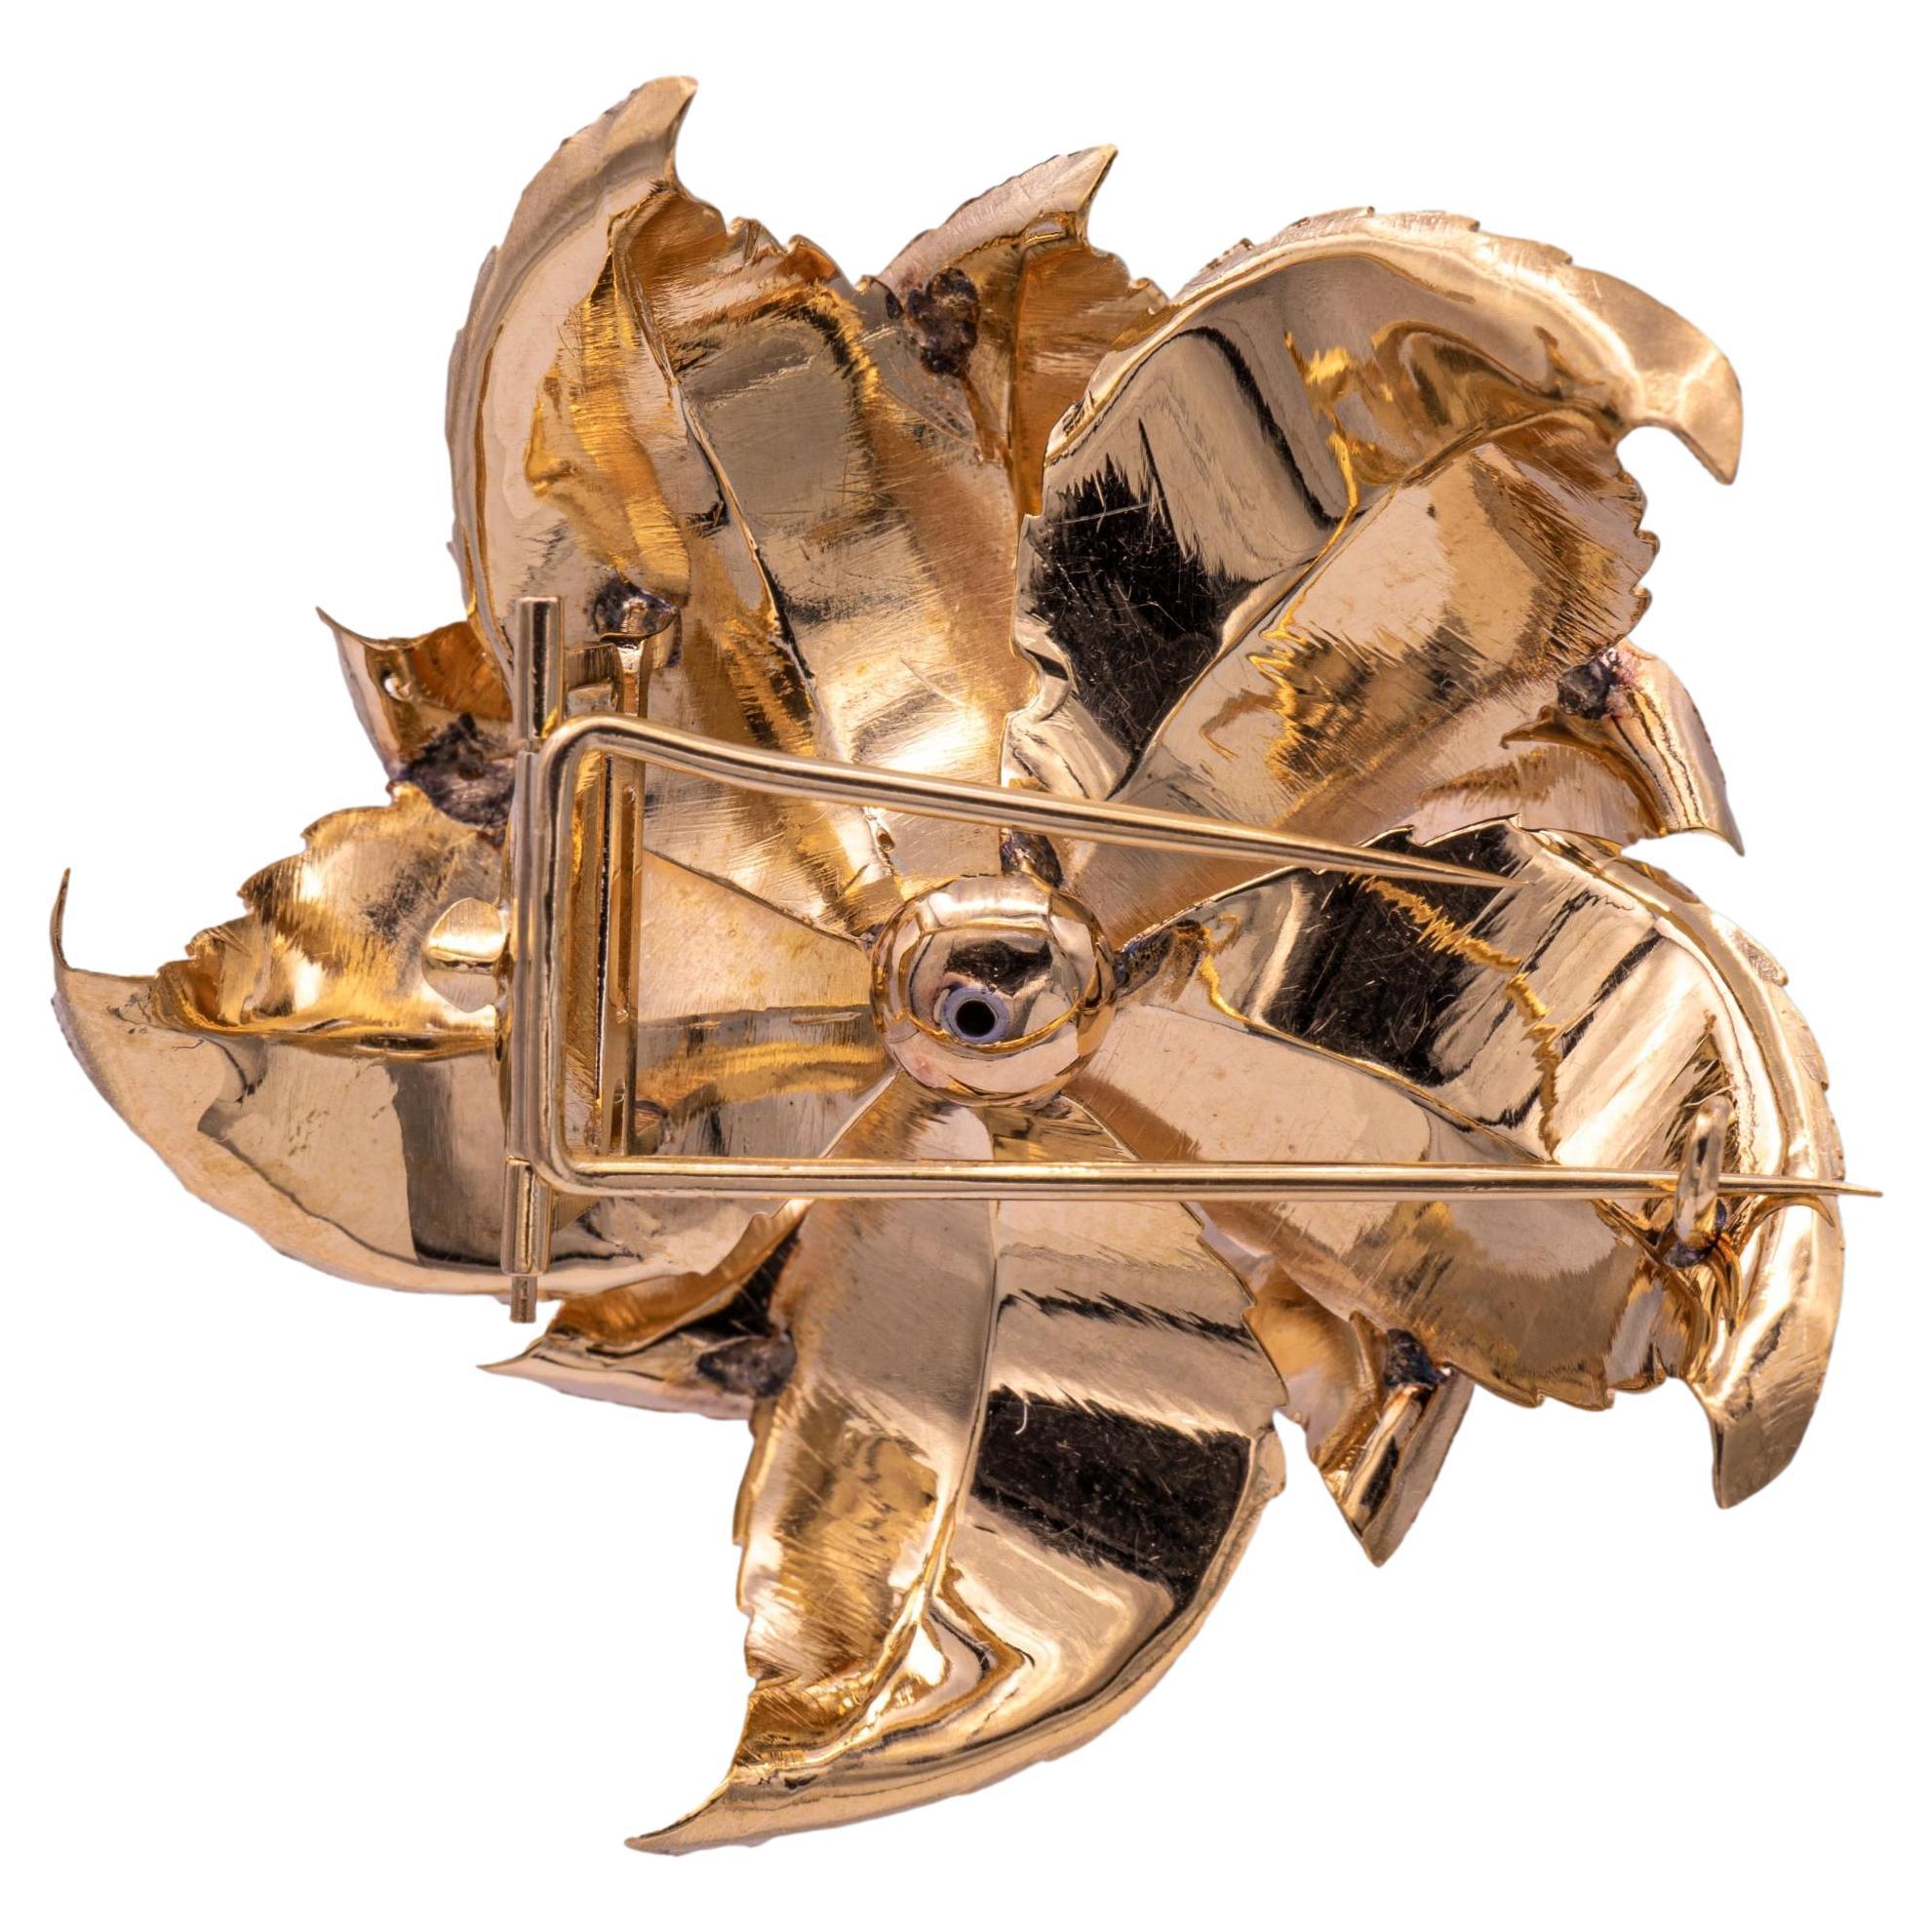 Vintage Flower brooch finely crafted in 14 karat rose gold with yellow gold details. Brooch has a silk satin textured finish with a diamond cluster center comprised of 7 single cut diamonds 0.42 carats total weight approximately. The brooch has a